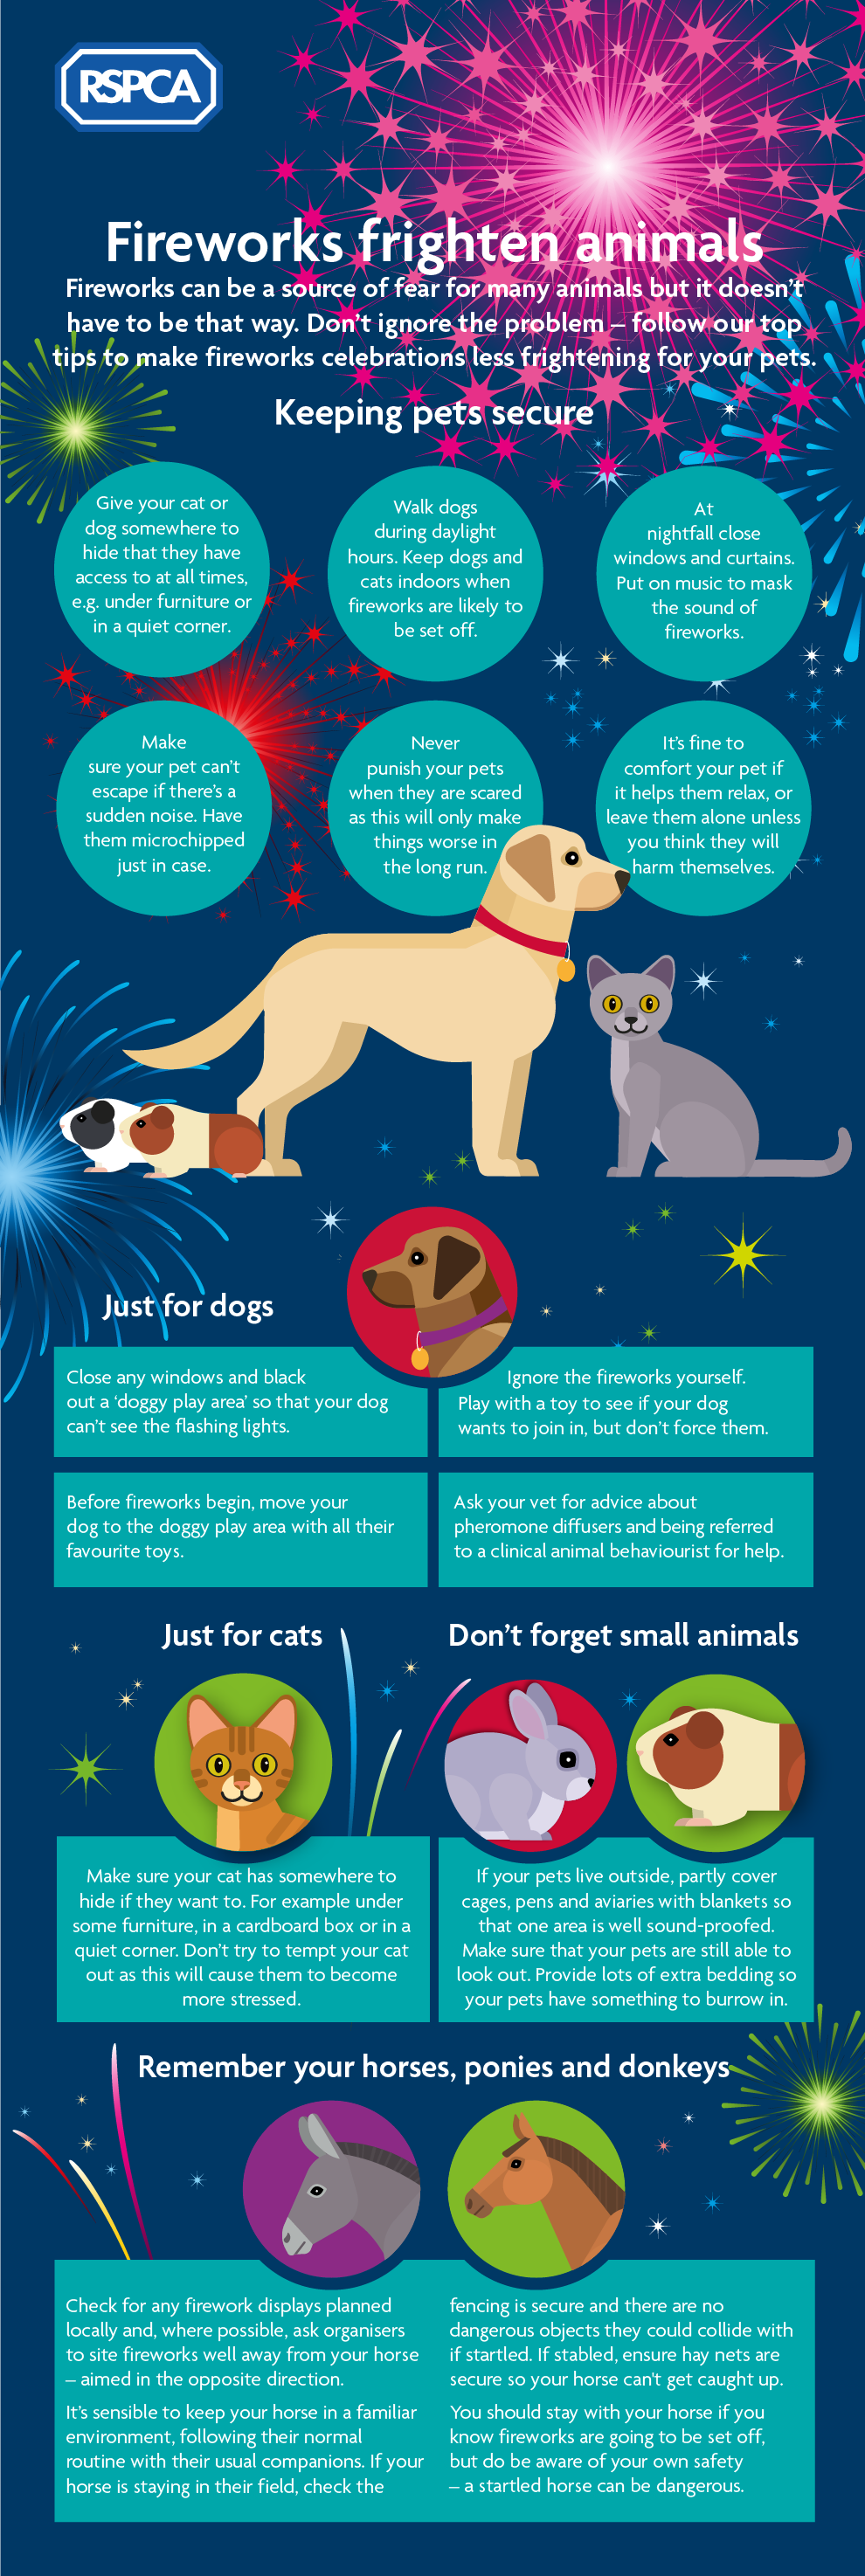 Advice for pet owners during the fireworks season © RSPCA